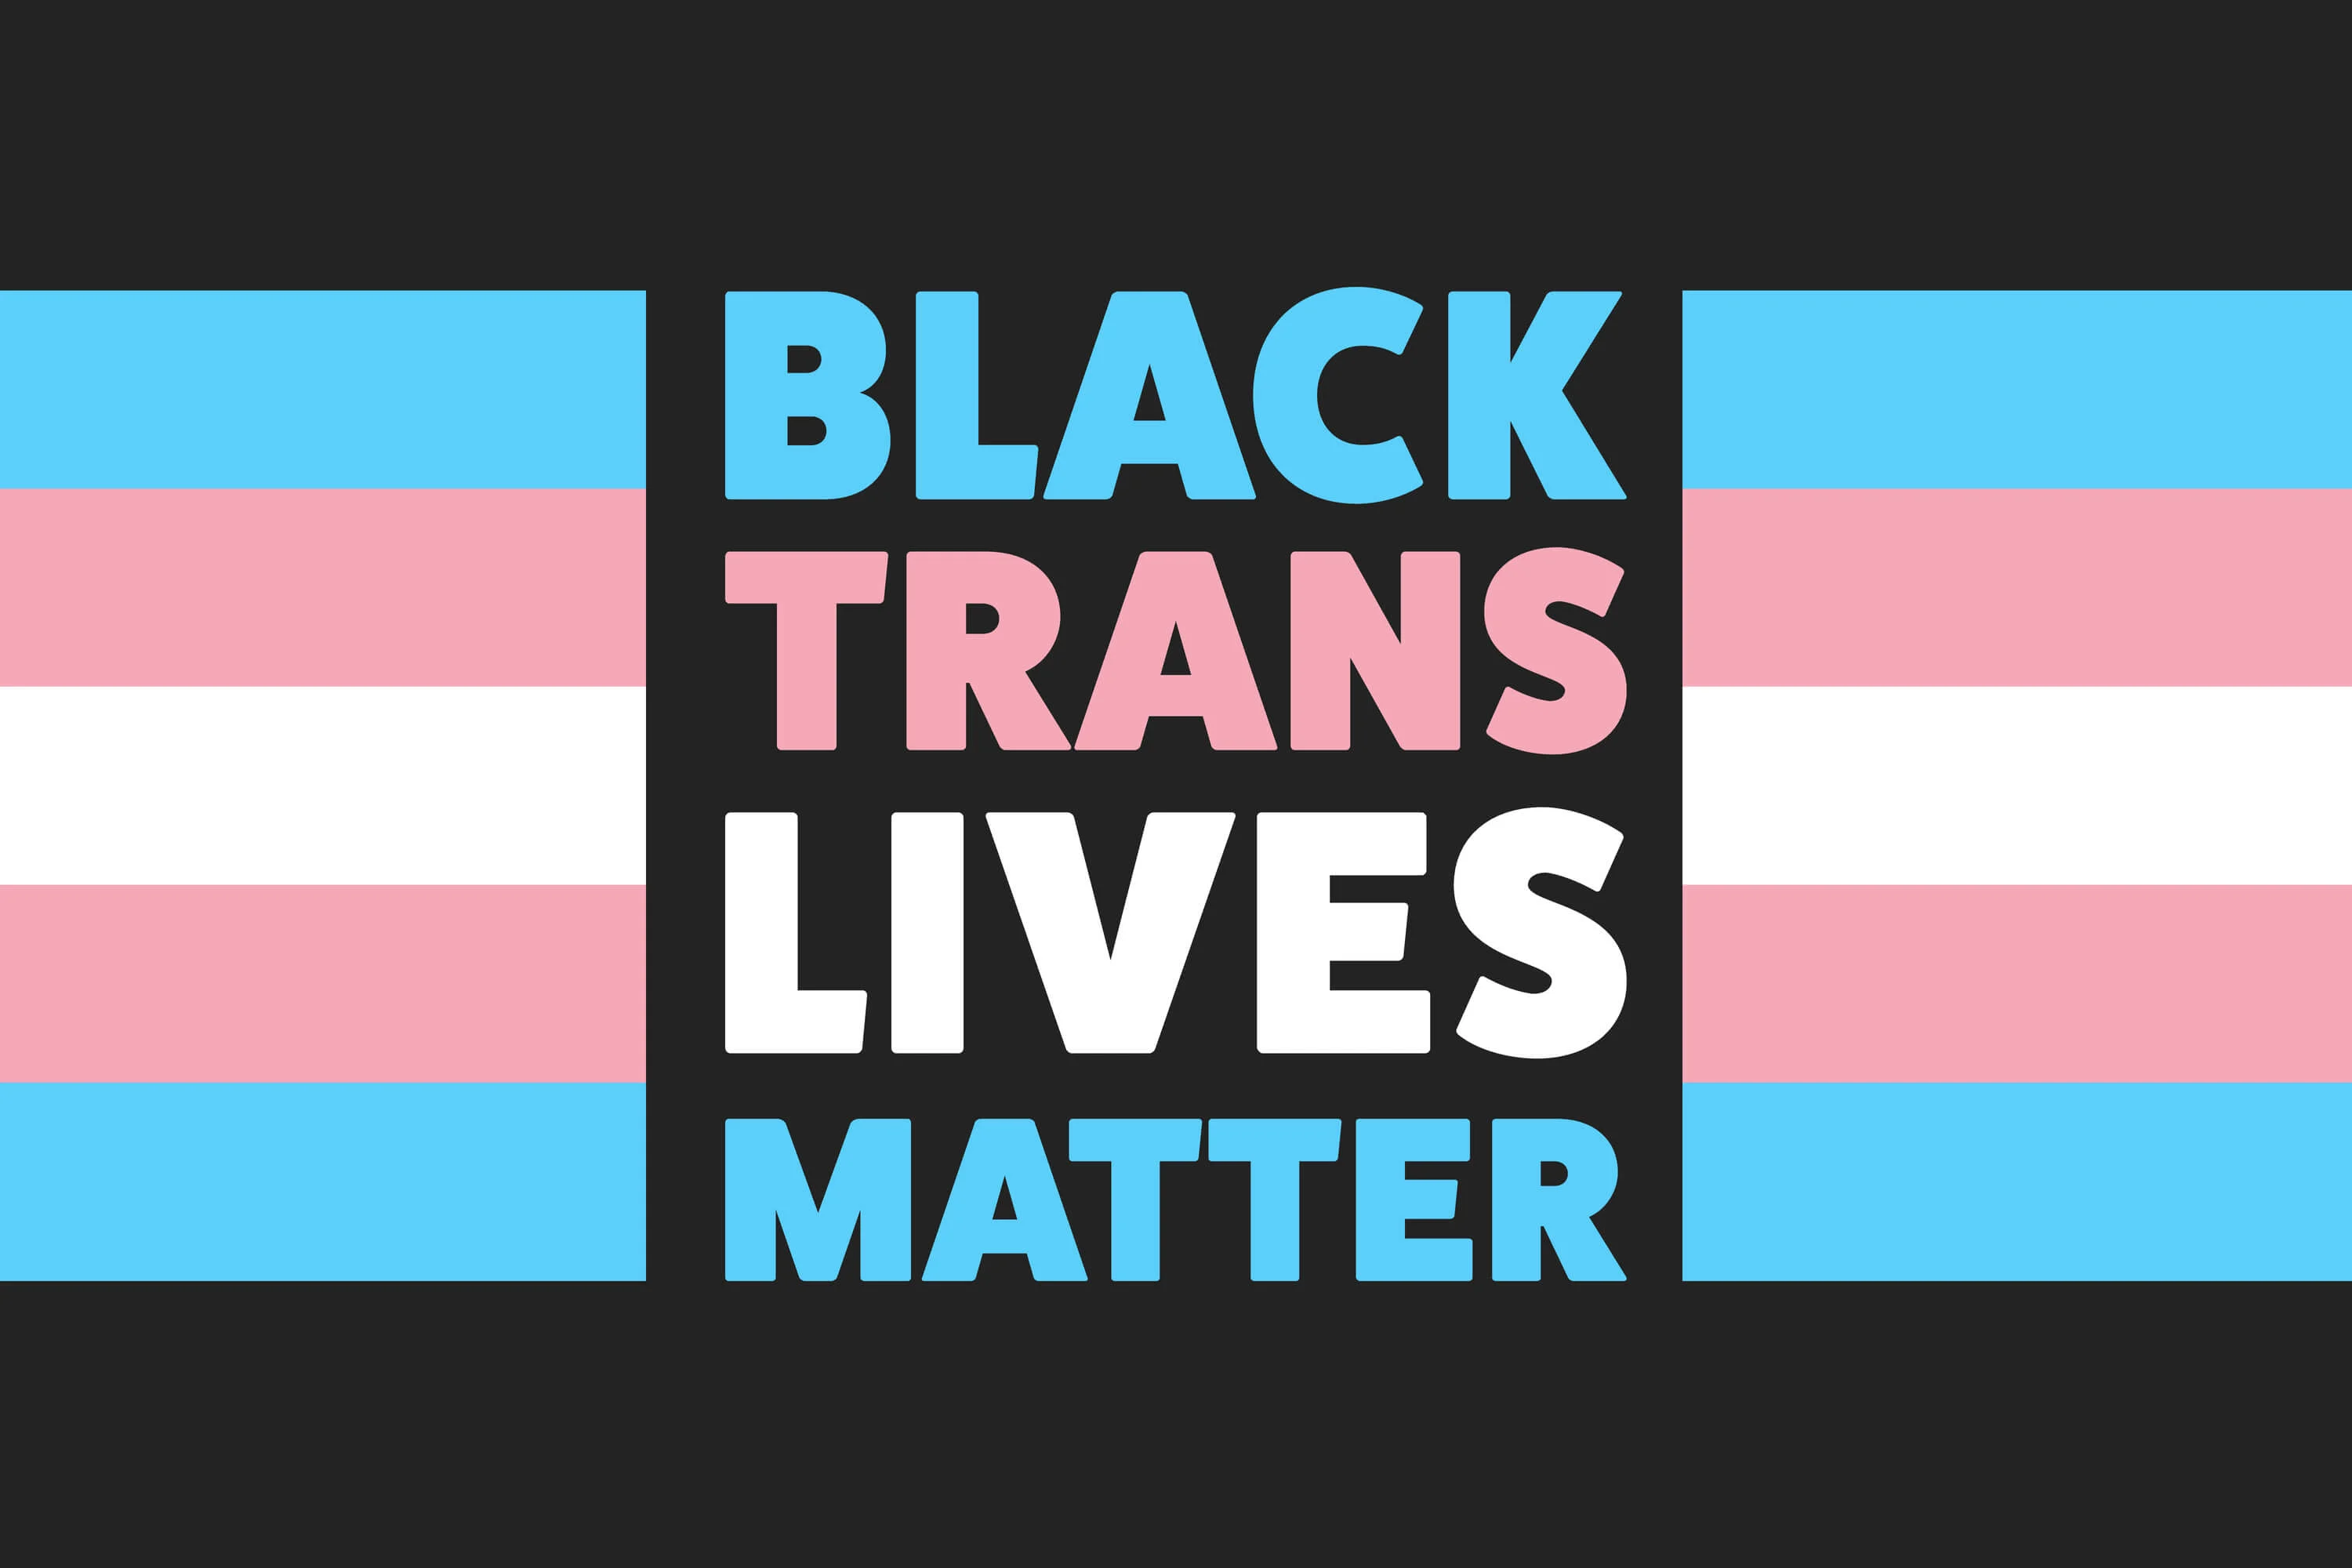 A picture of the trans flag on a black background. In the middle is “Black Trans Lives Matter” in the colors of the trans pride flag.